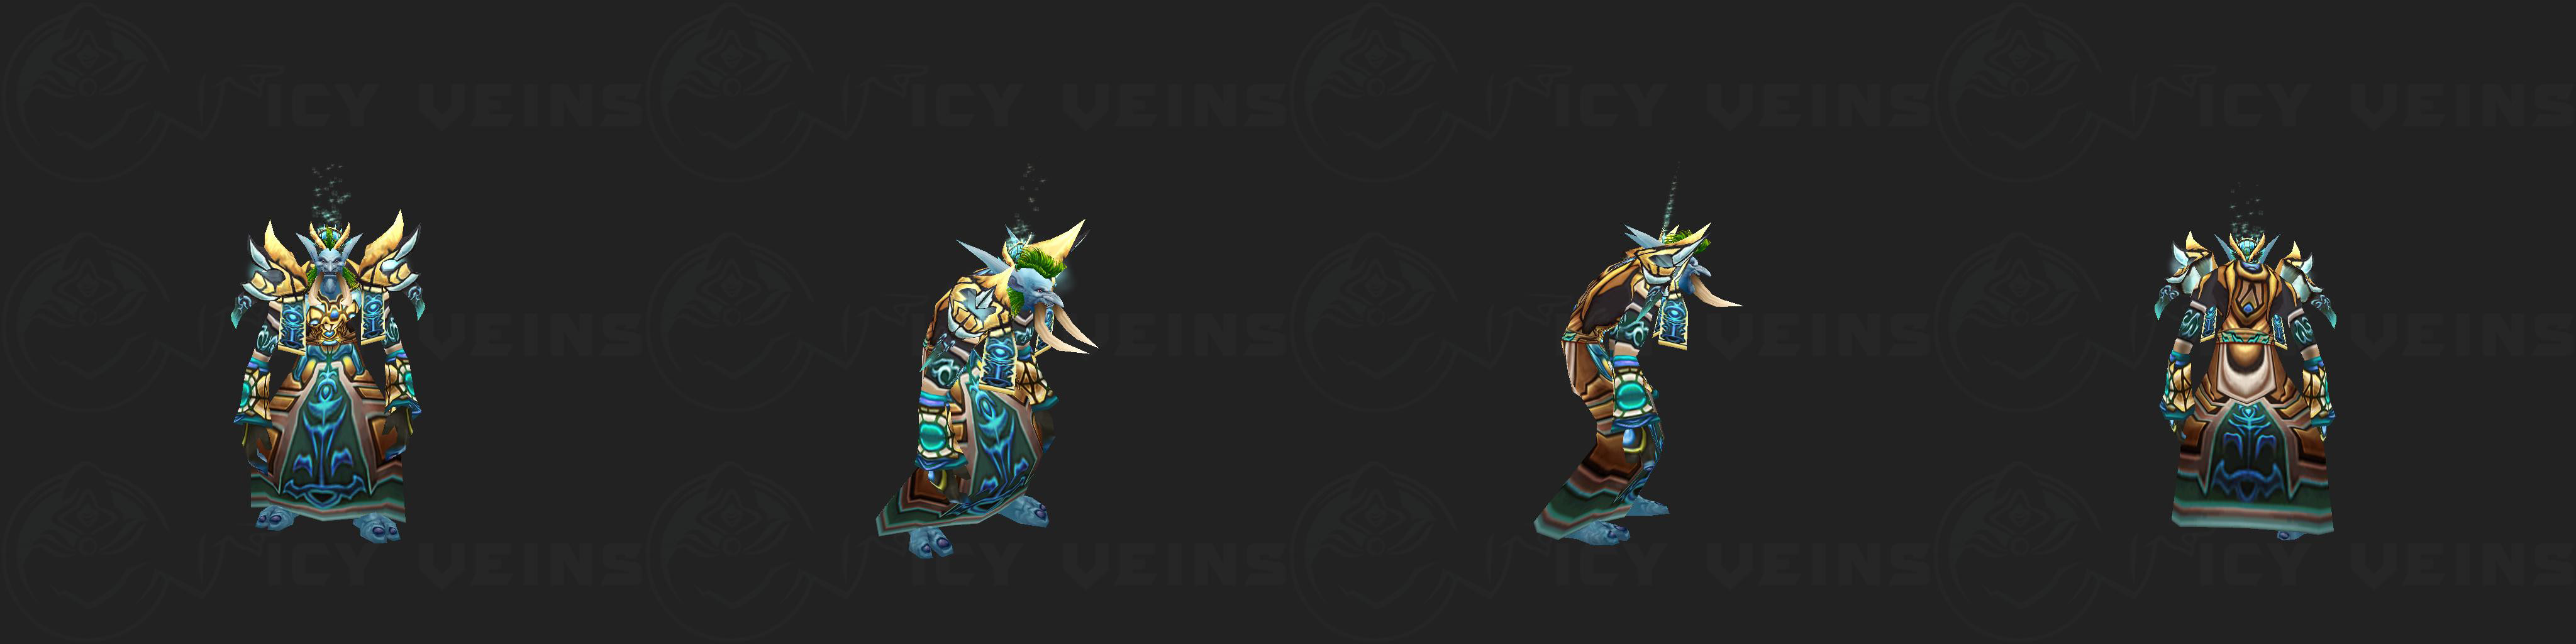 Tier 2 Priest Set: Vestments of Transcendence - WoW Classic - Icy Veins